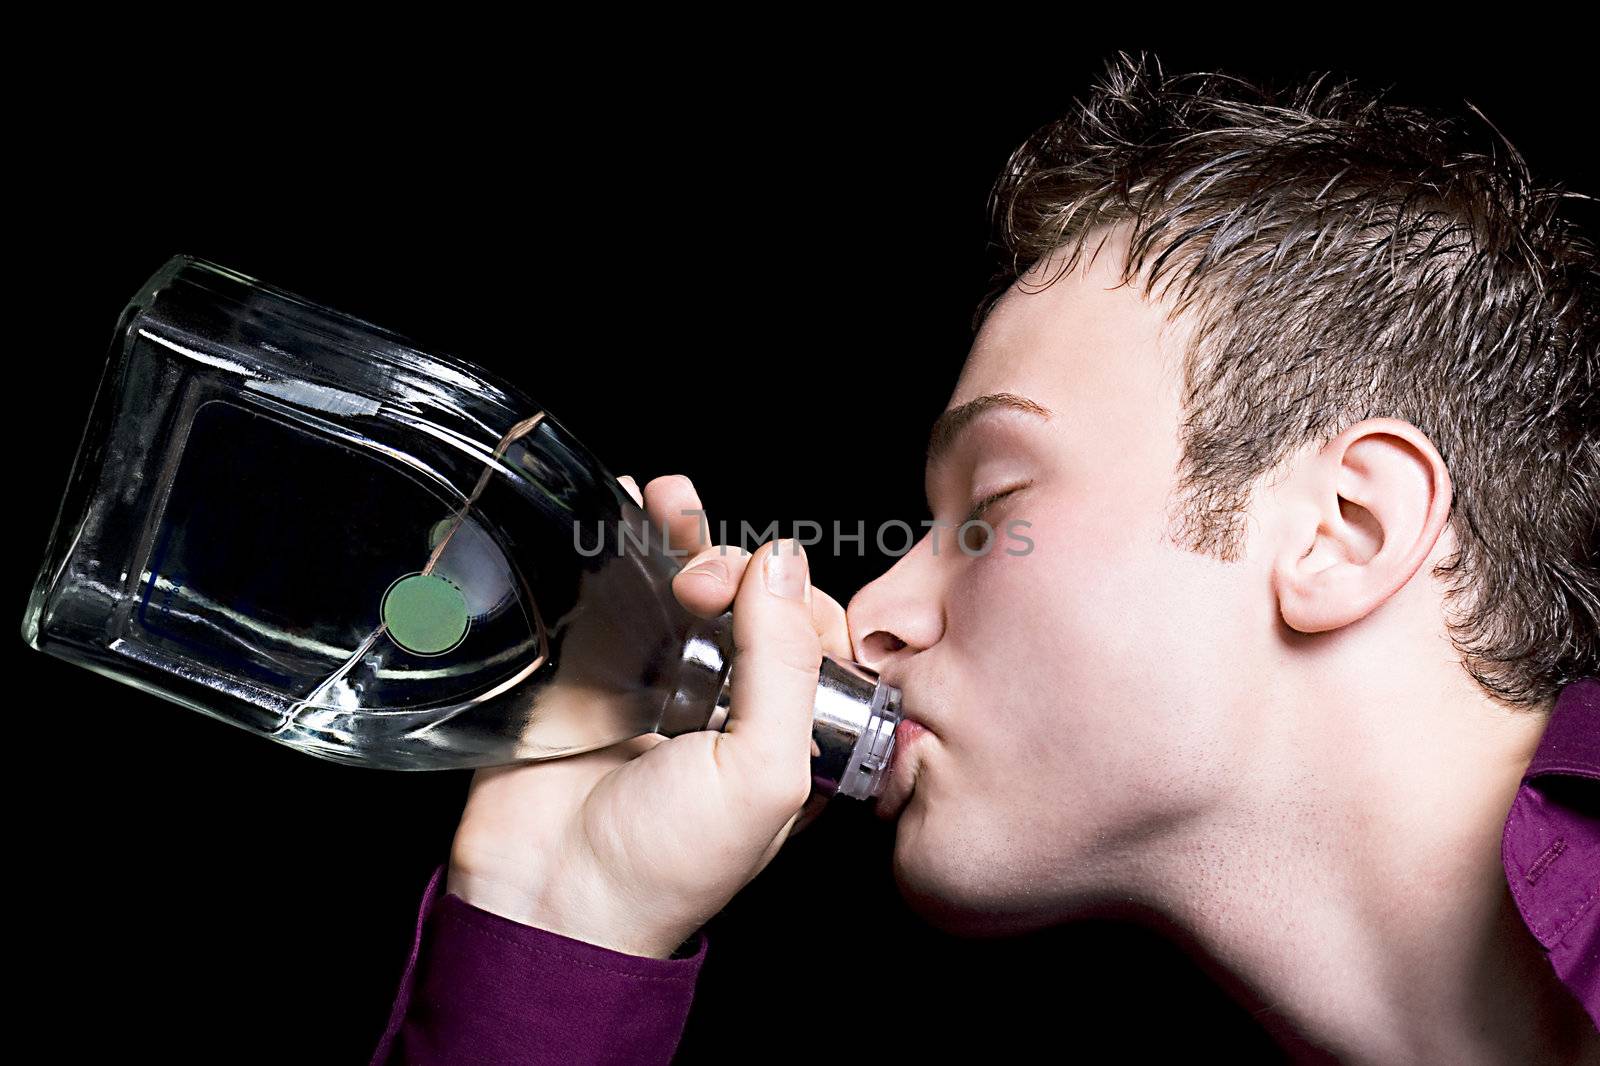 The young man drinks vodka from a bottle. Isolated on black by acidgrey